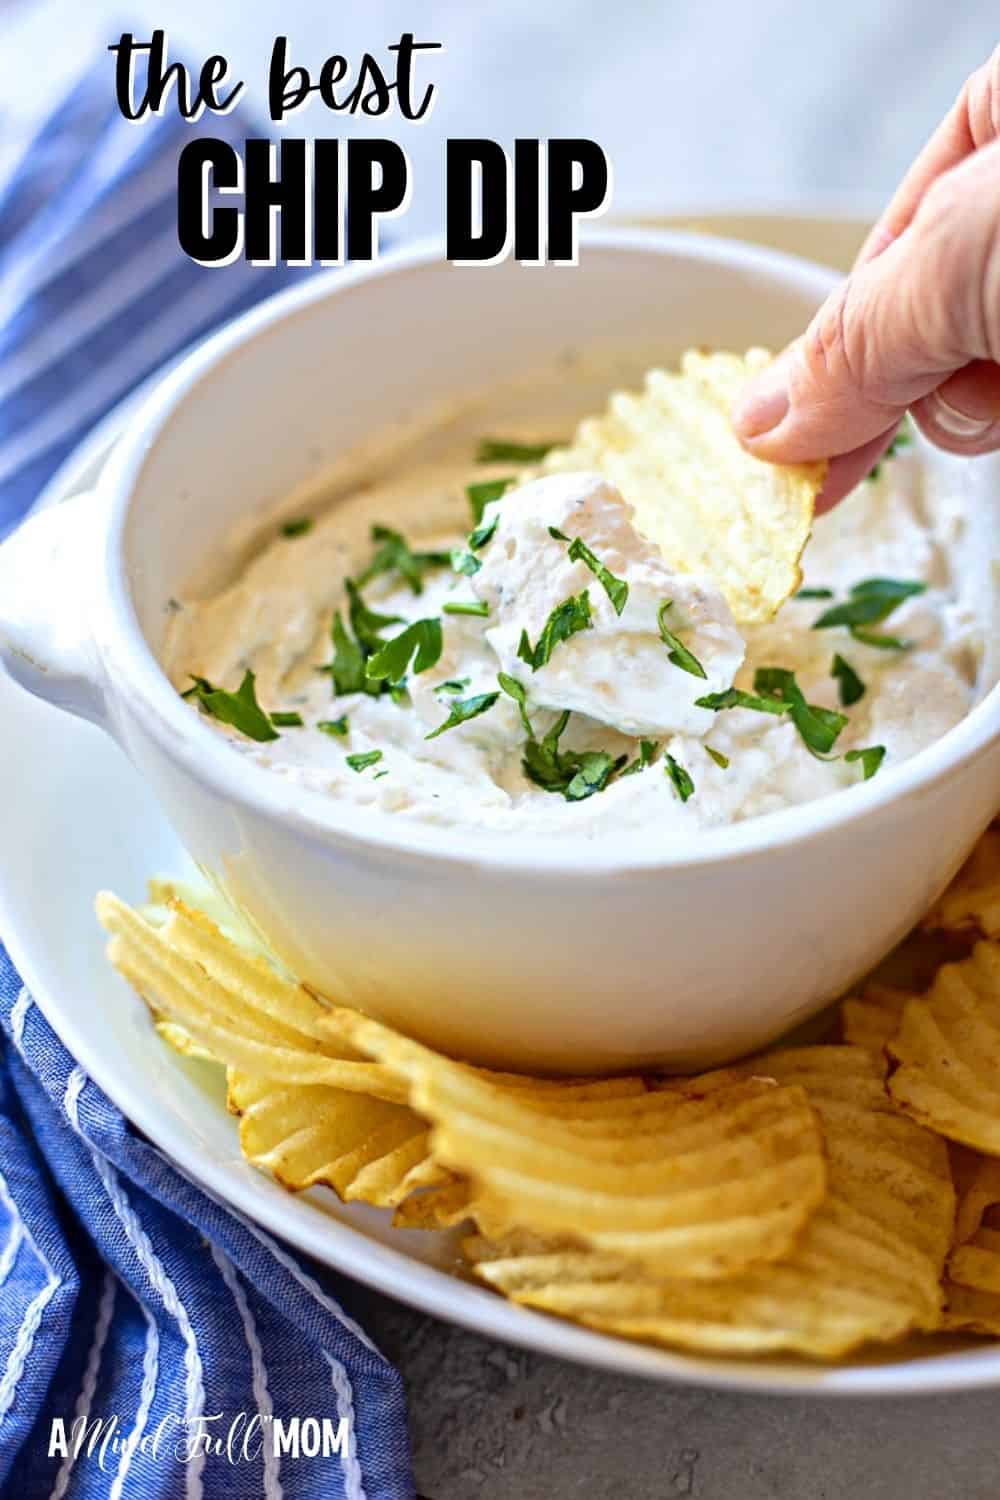 This homemade French Onion Chip Dip is the BEST chip dip ever! Made with sour cream and a few dried herbs, this dip comes together in minutes and tastes better than any store-bought chip dip. 